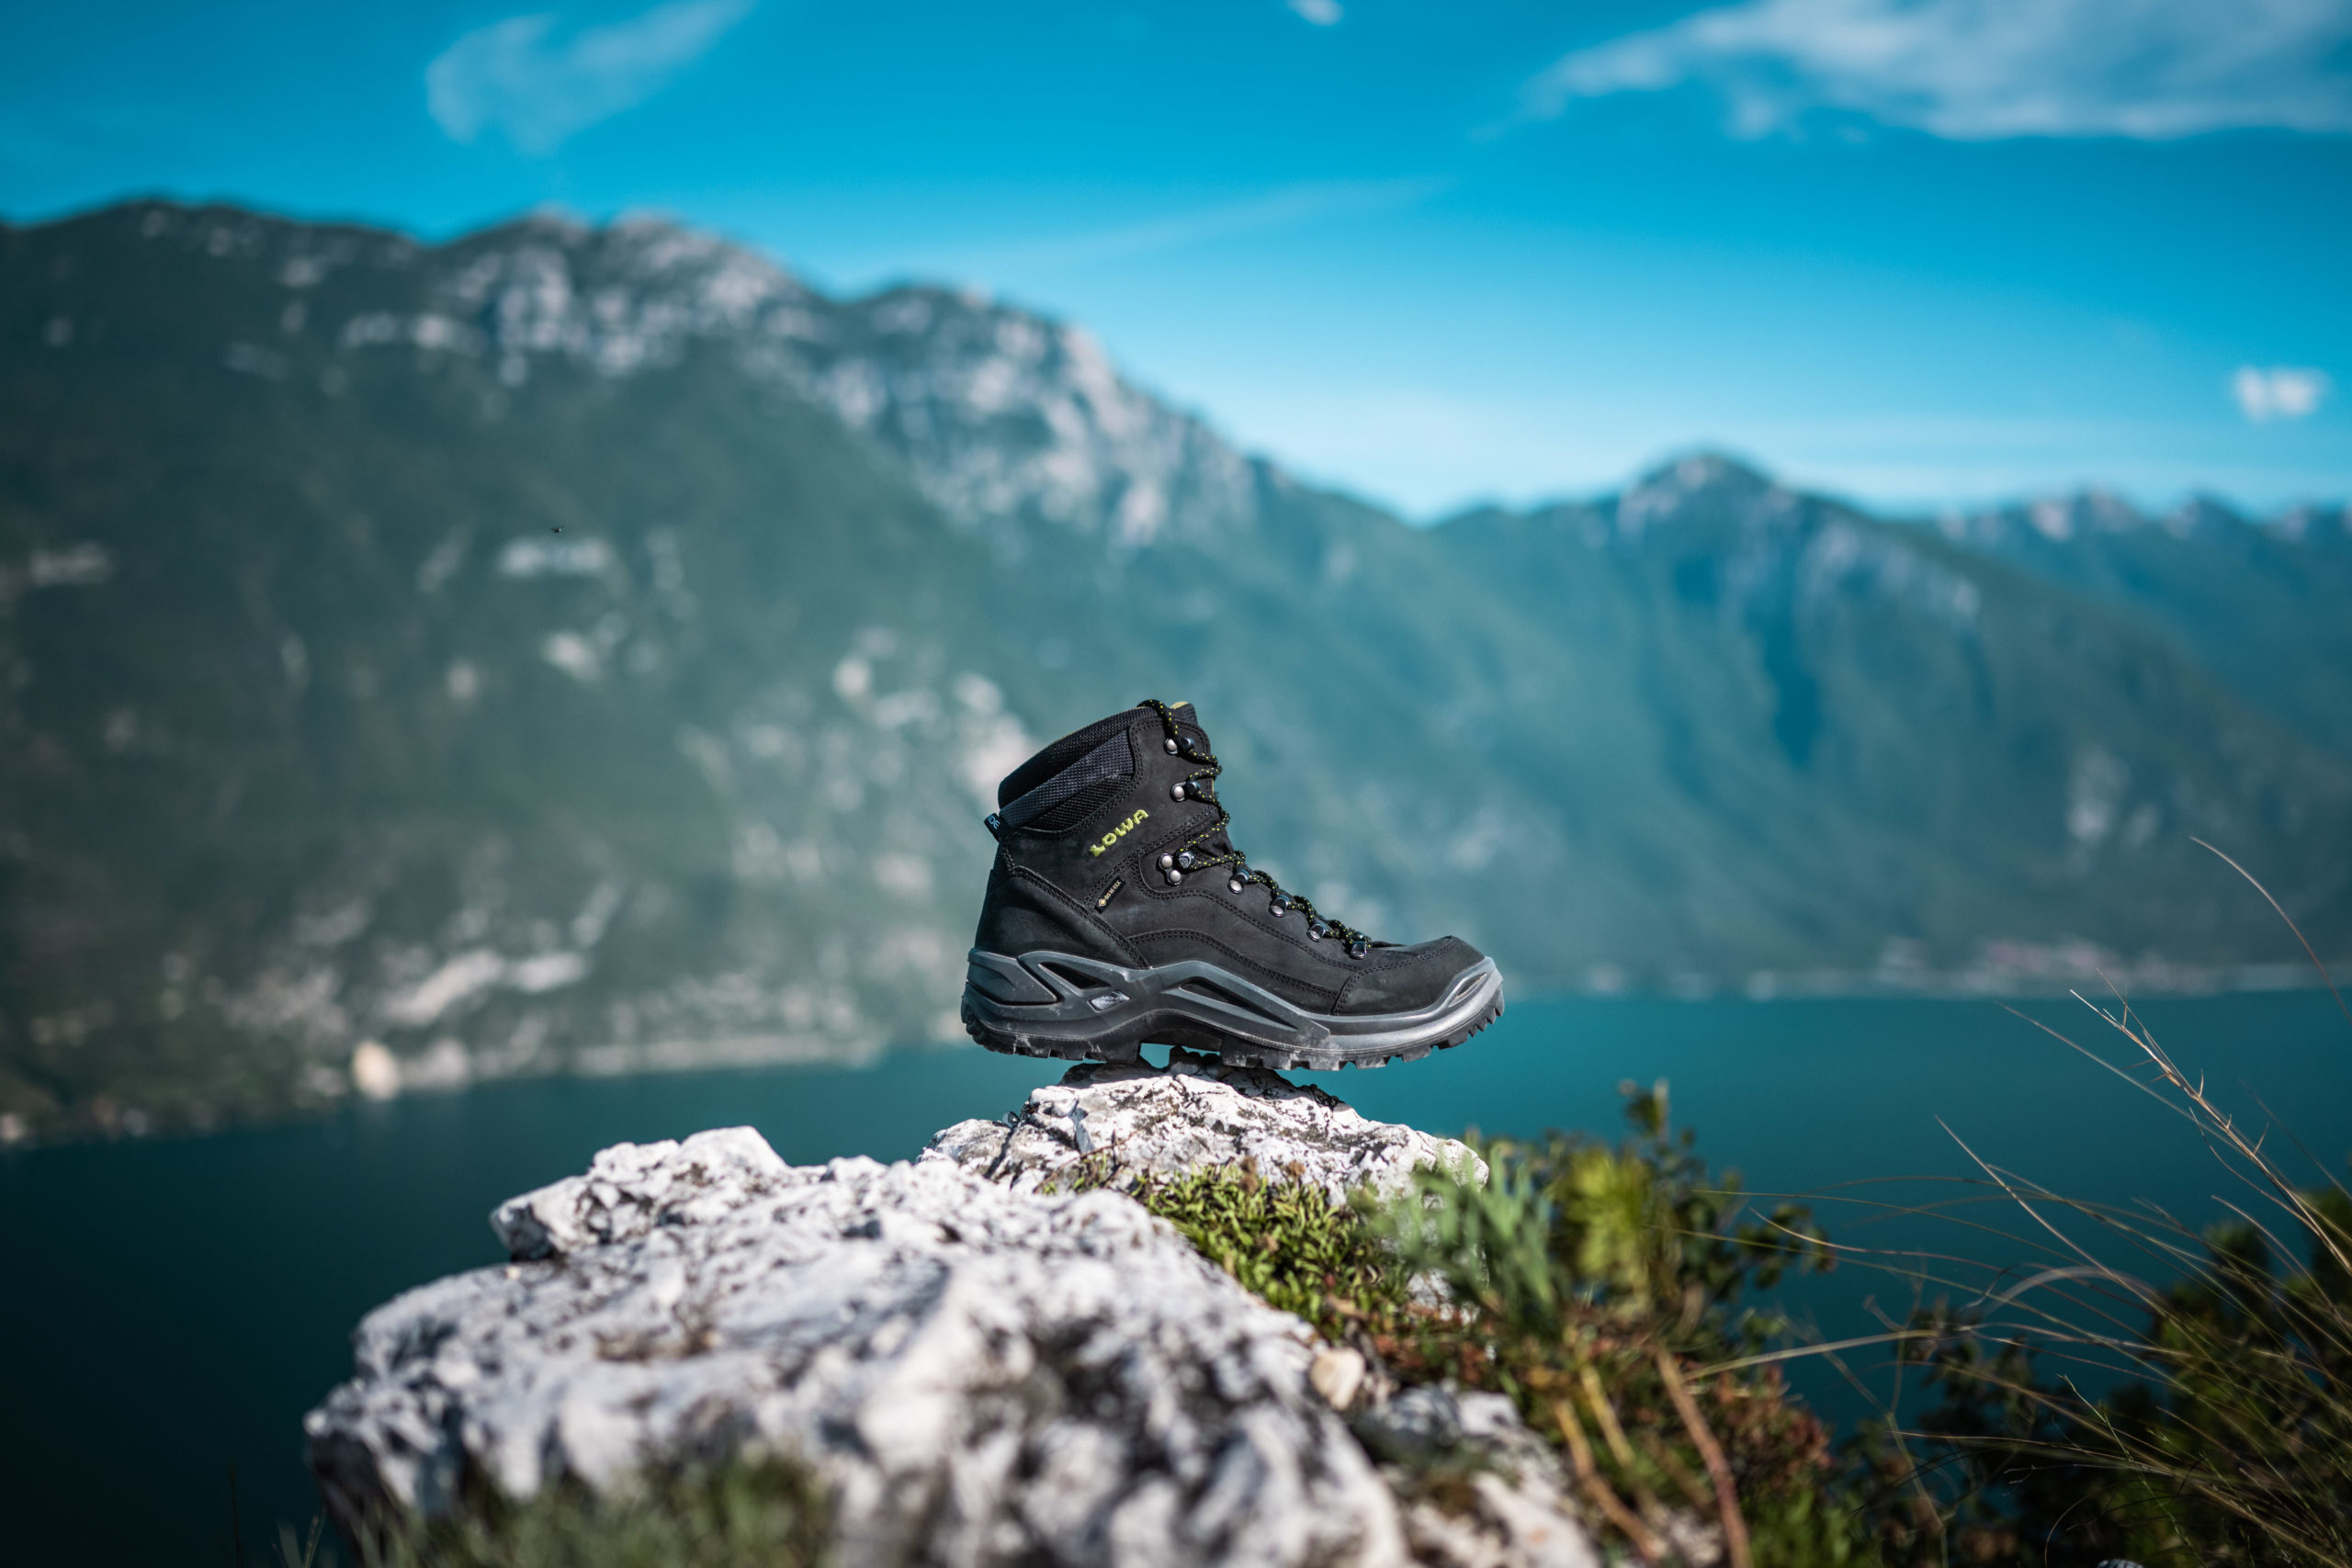 Test Time: three all-round shoes - Pill to mountain! face Journal The every Outdoor